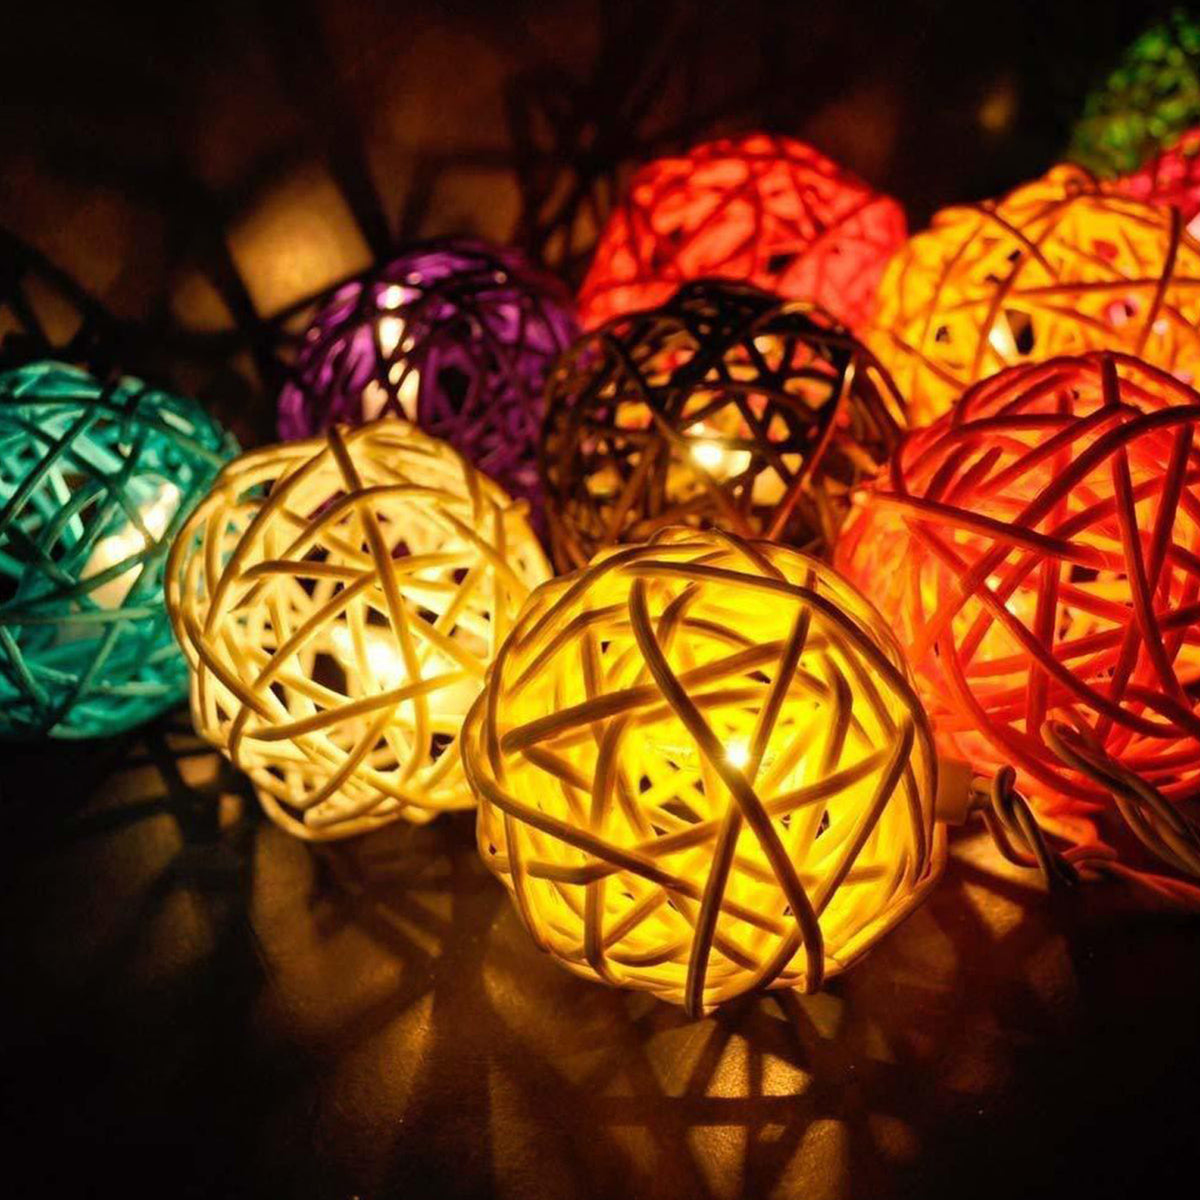 DecorTwist LED Wire Ball for Home and Office Decor| Indoor & Outdoor Decorative Lights|Christmas |Diwali |Wedding | Christmas | Diwali | Wedding | 3.05 MTR